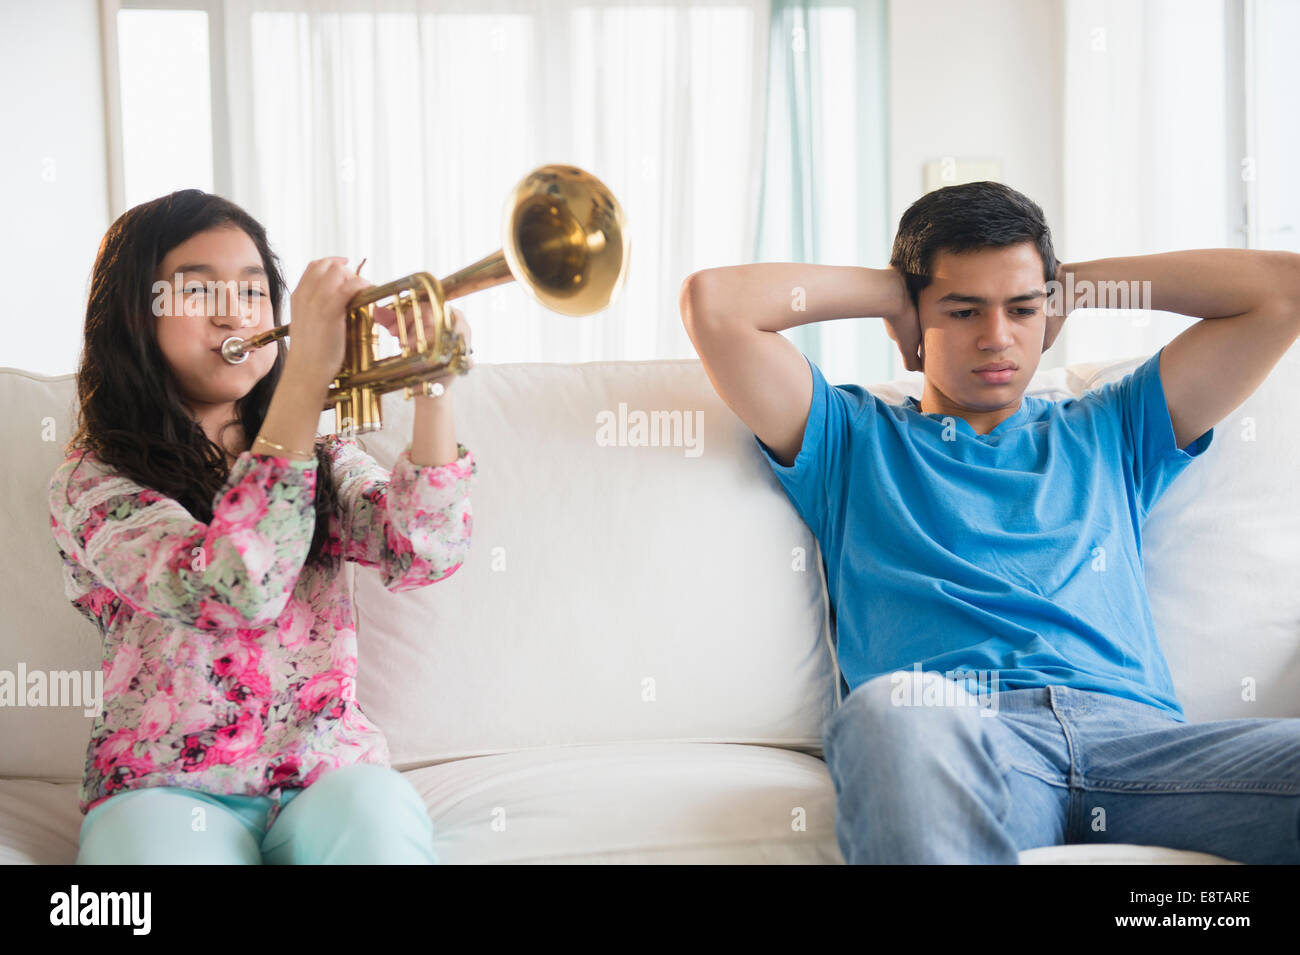 Hispanic brother covering his ears as sister practices trumpet in living room Stock Photo